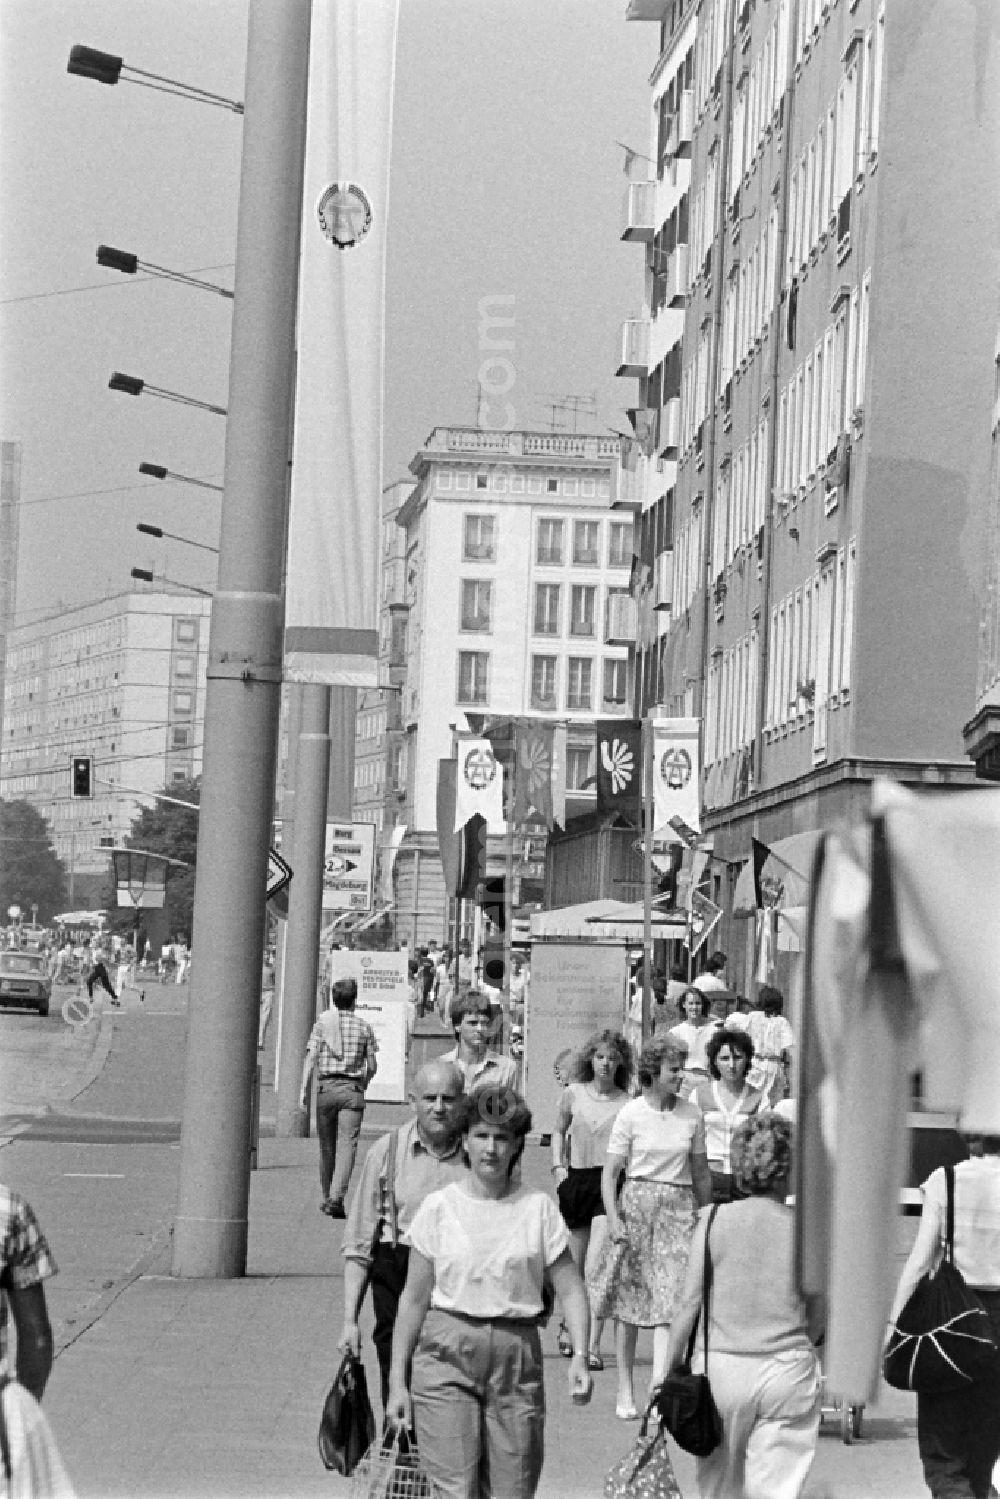 GDR picture archive: Magdeburg - People stroll along Karl-Marx-Strasse (today Breiter Weg) in Magdeburg, Saxony-Anhalt in the area of the former GDR, German Democratic Republic. Everything is festively decorated on the occasion of the 21st Workers' Festival